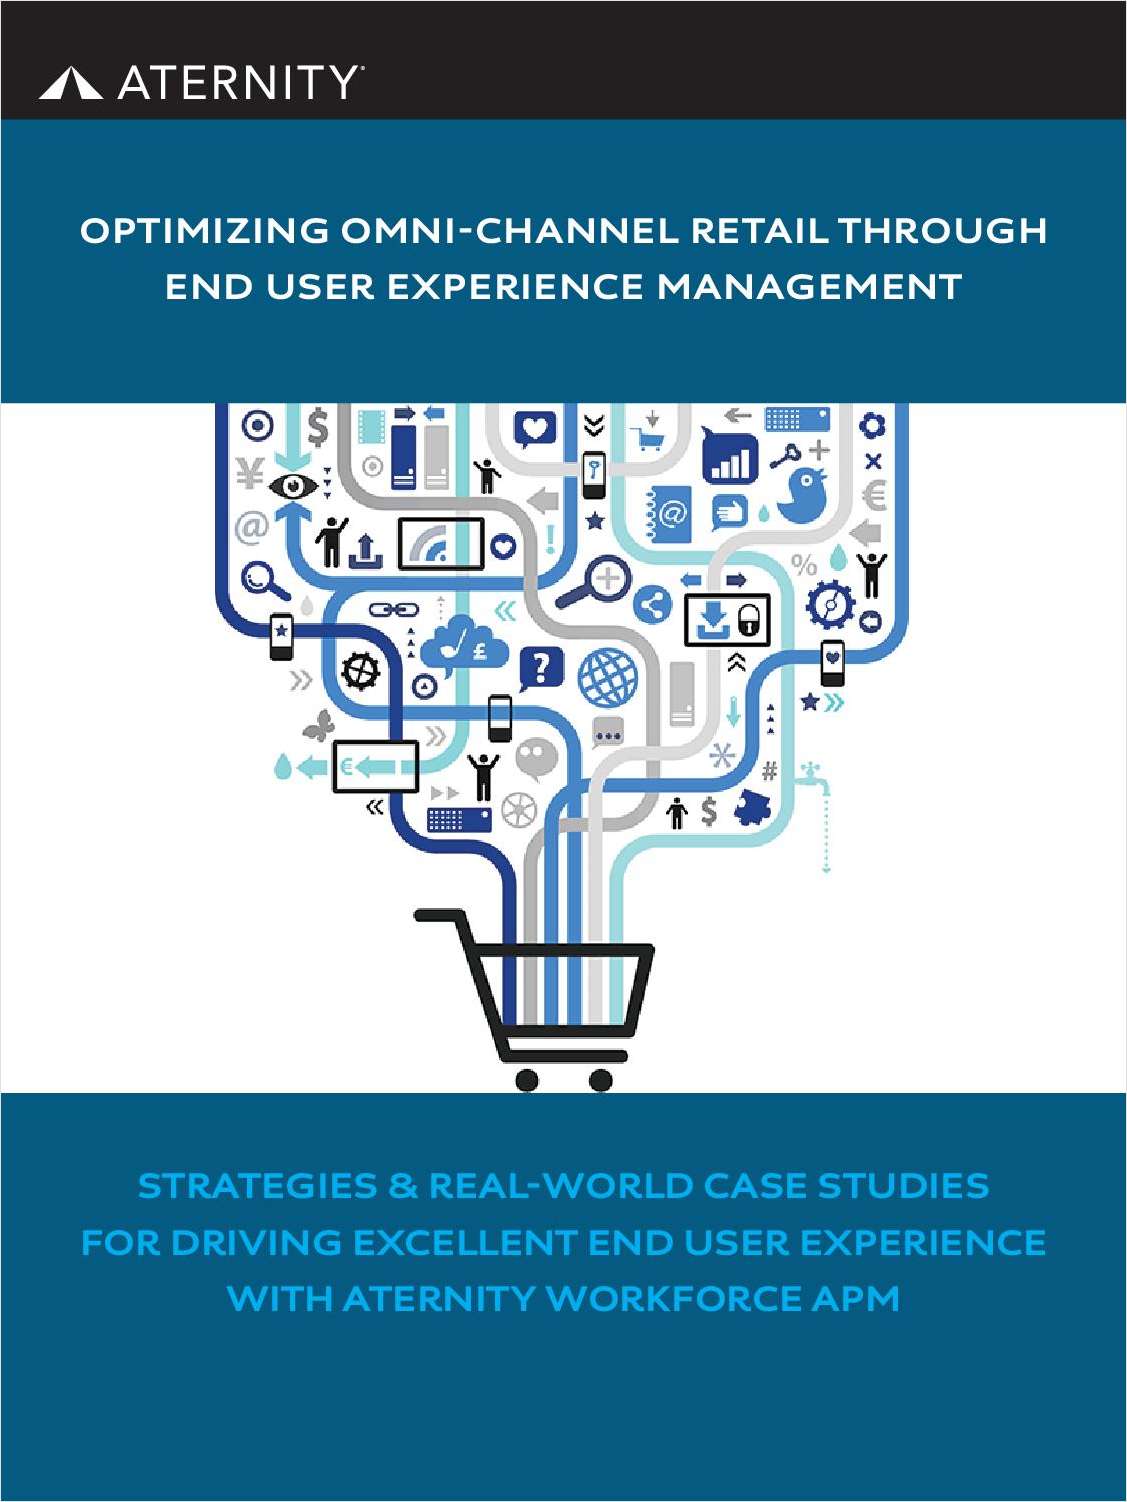 Optimizing Omni-channel Retail through End User Experience Management